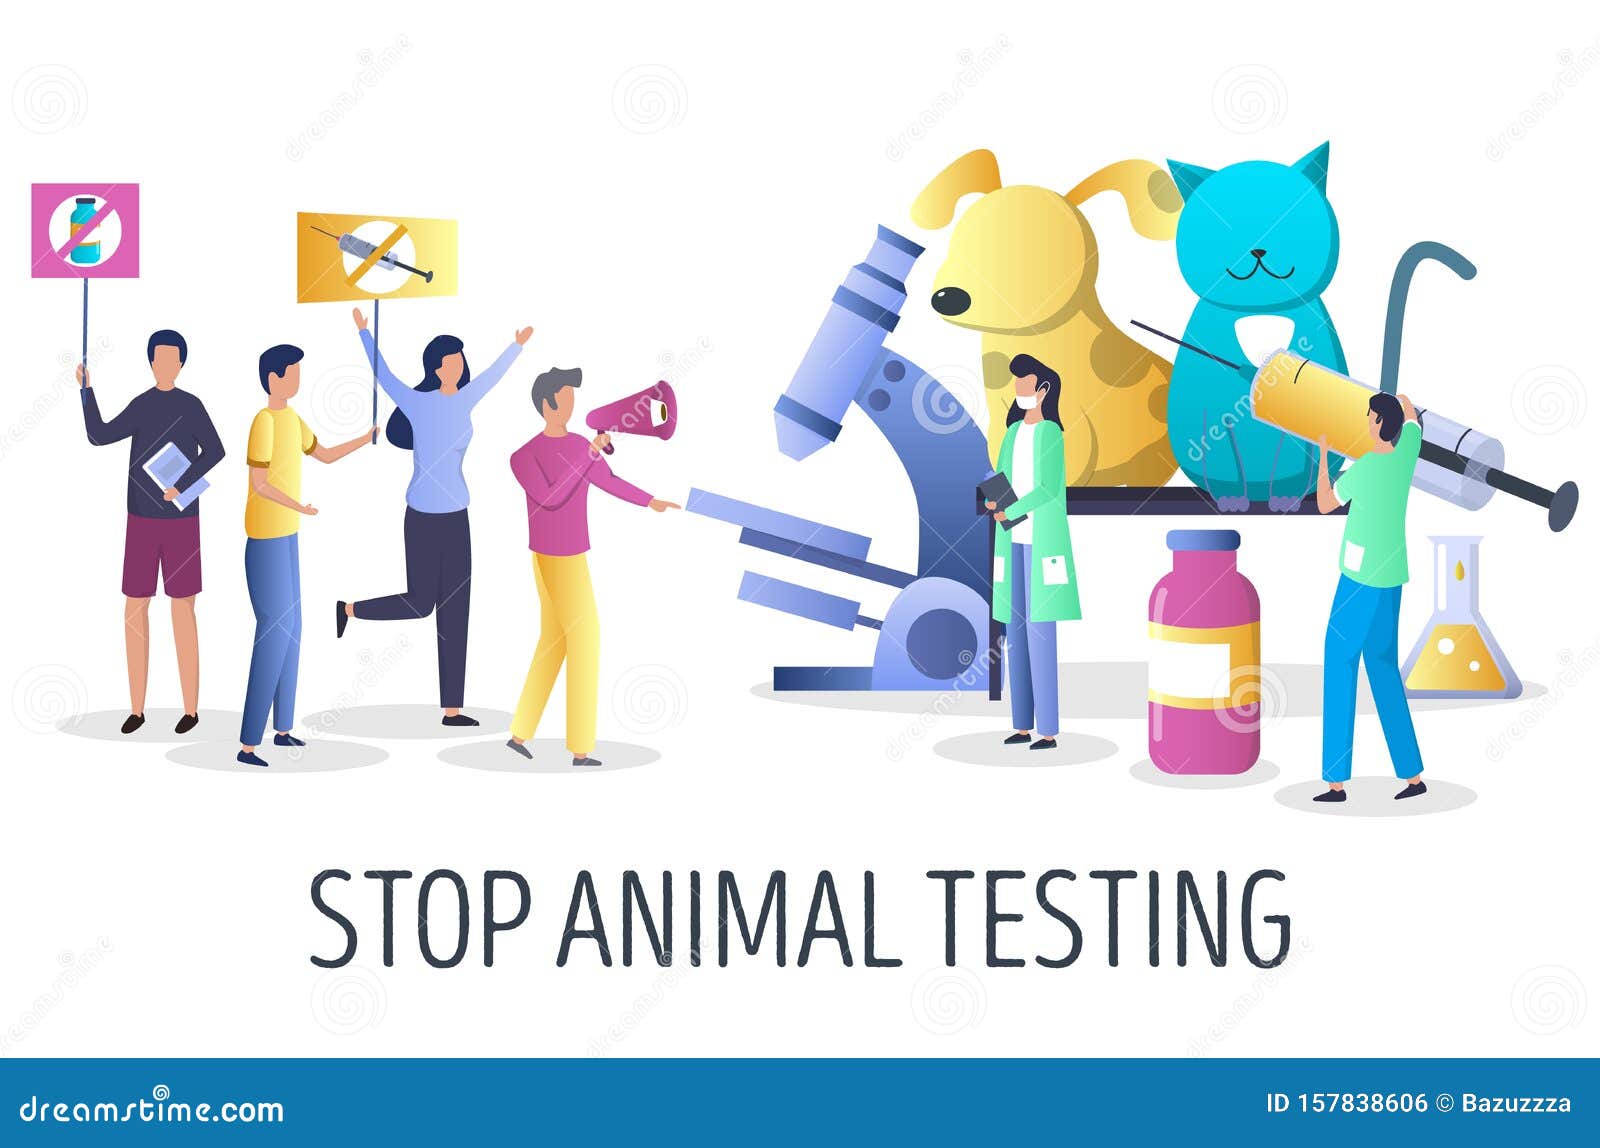 how to stop animal testing essay